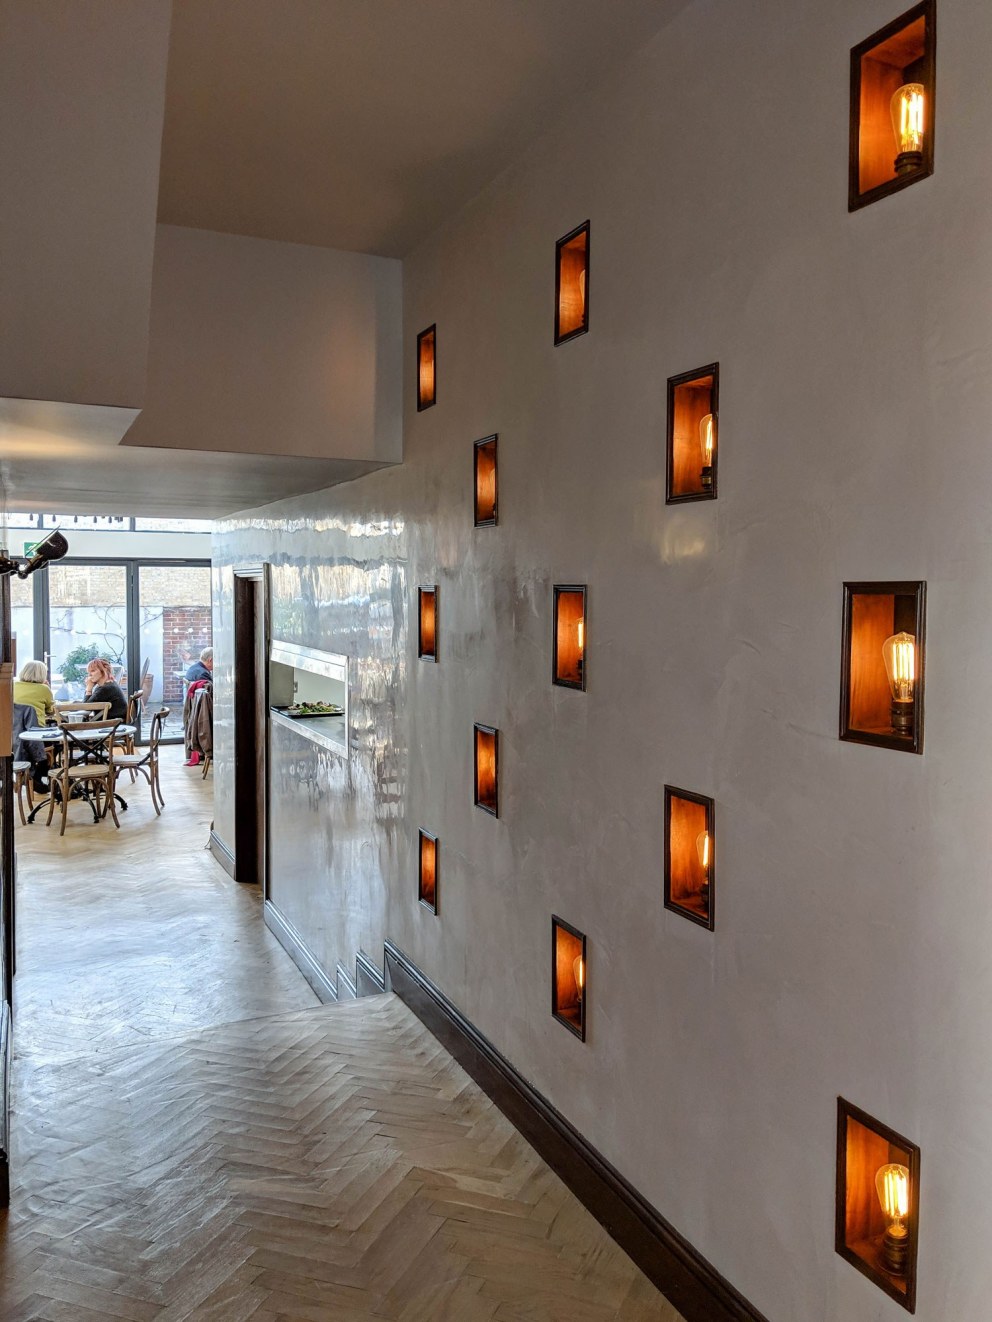 ThirtyEight, Summertown Oxford | Corridor between bar and restaurant showing wall with recessed lighting | Interior Designers